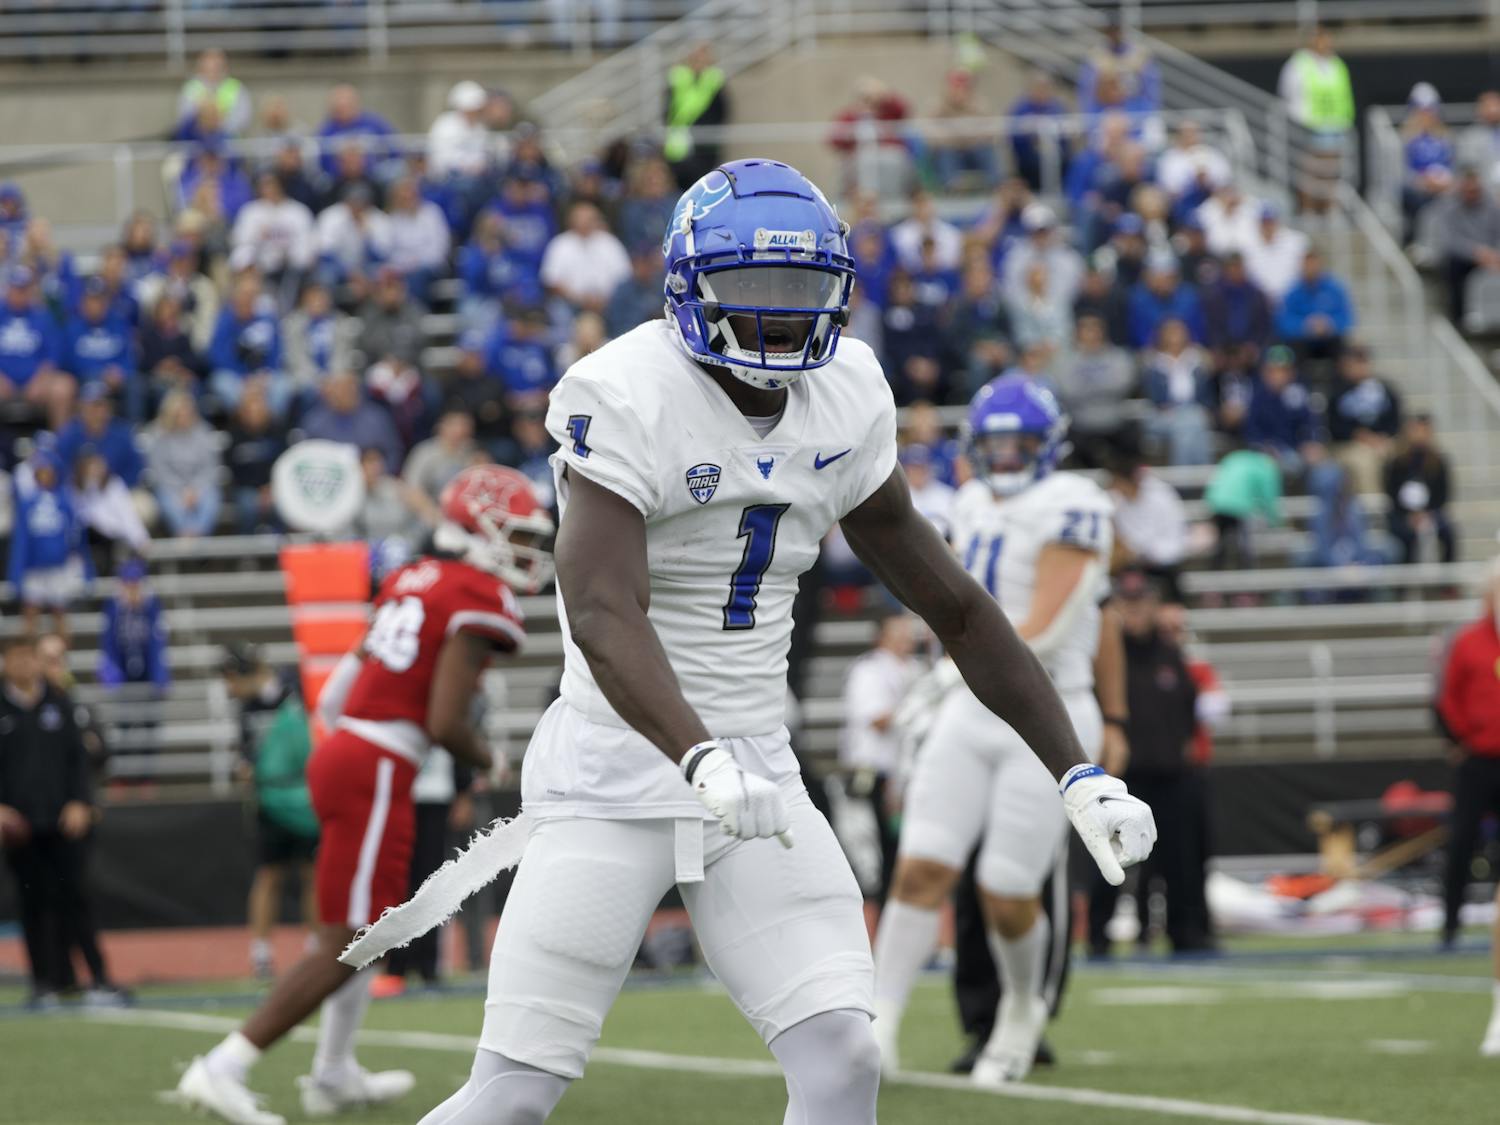 Justin Marshall came to UB in 2022 as a graduate transfer